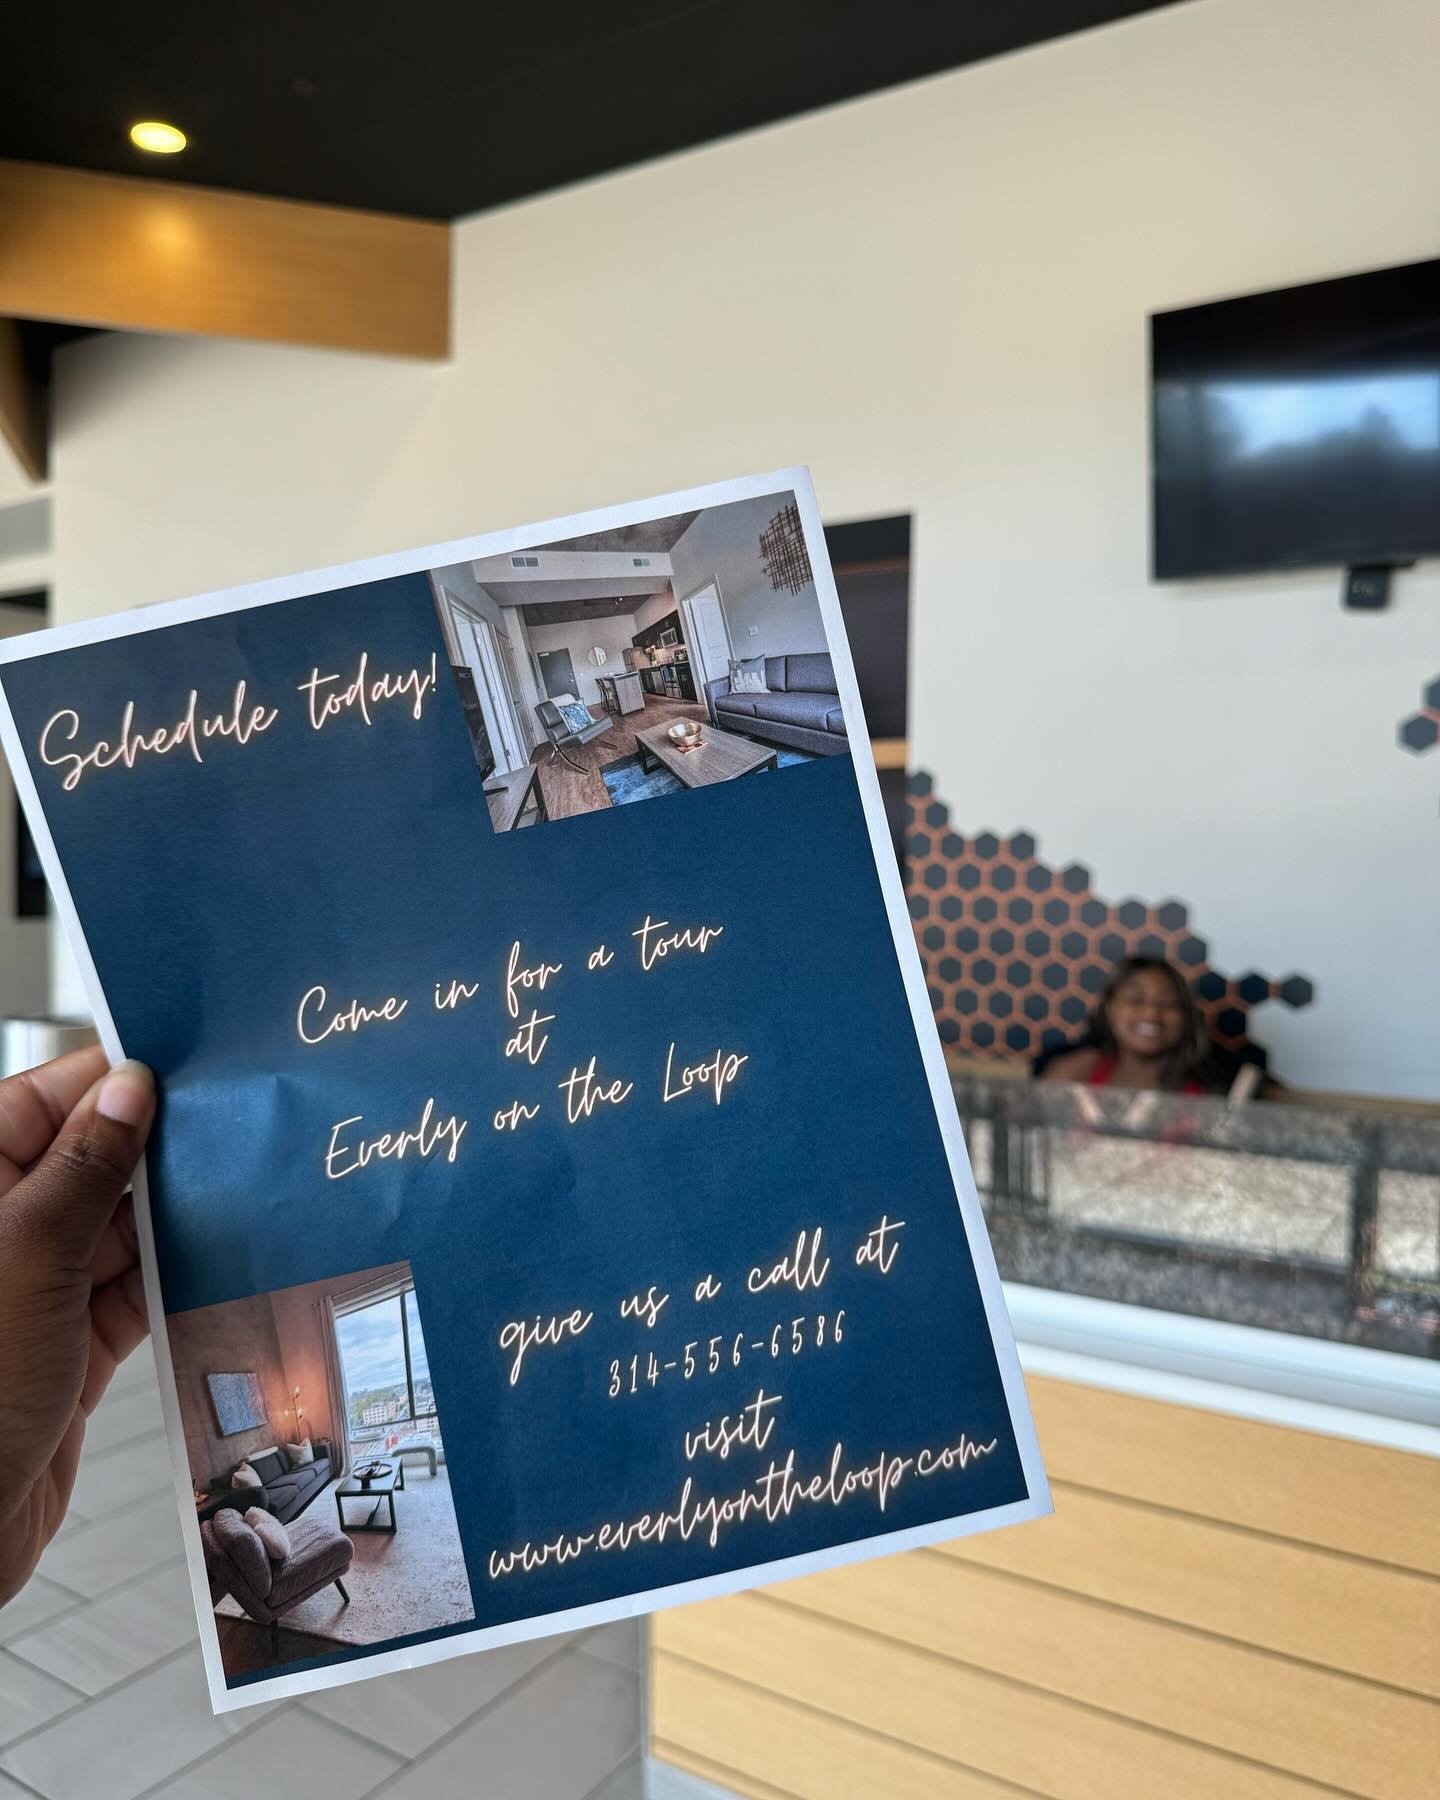 COME TOUR‼️‼️‼️

Give us call at 314-556-6586 to come look at your new home 🏡 😍

#washu #slu #home #studnethousing #stl #loop #delmar #apartments #highrise